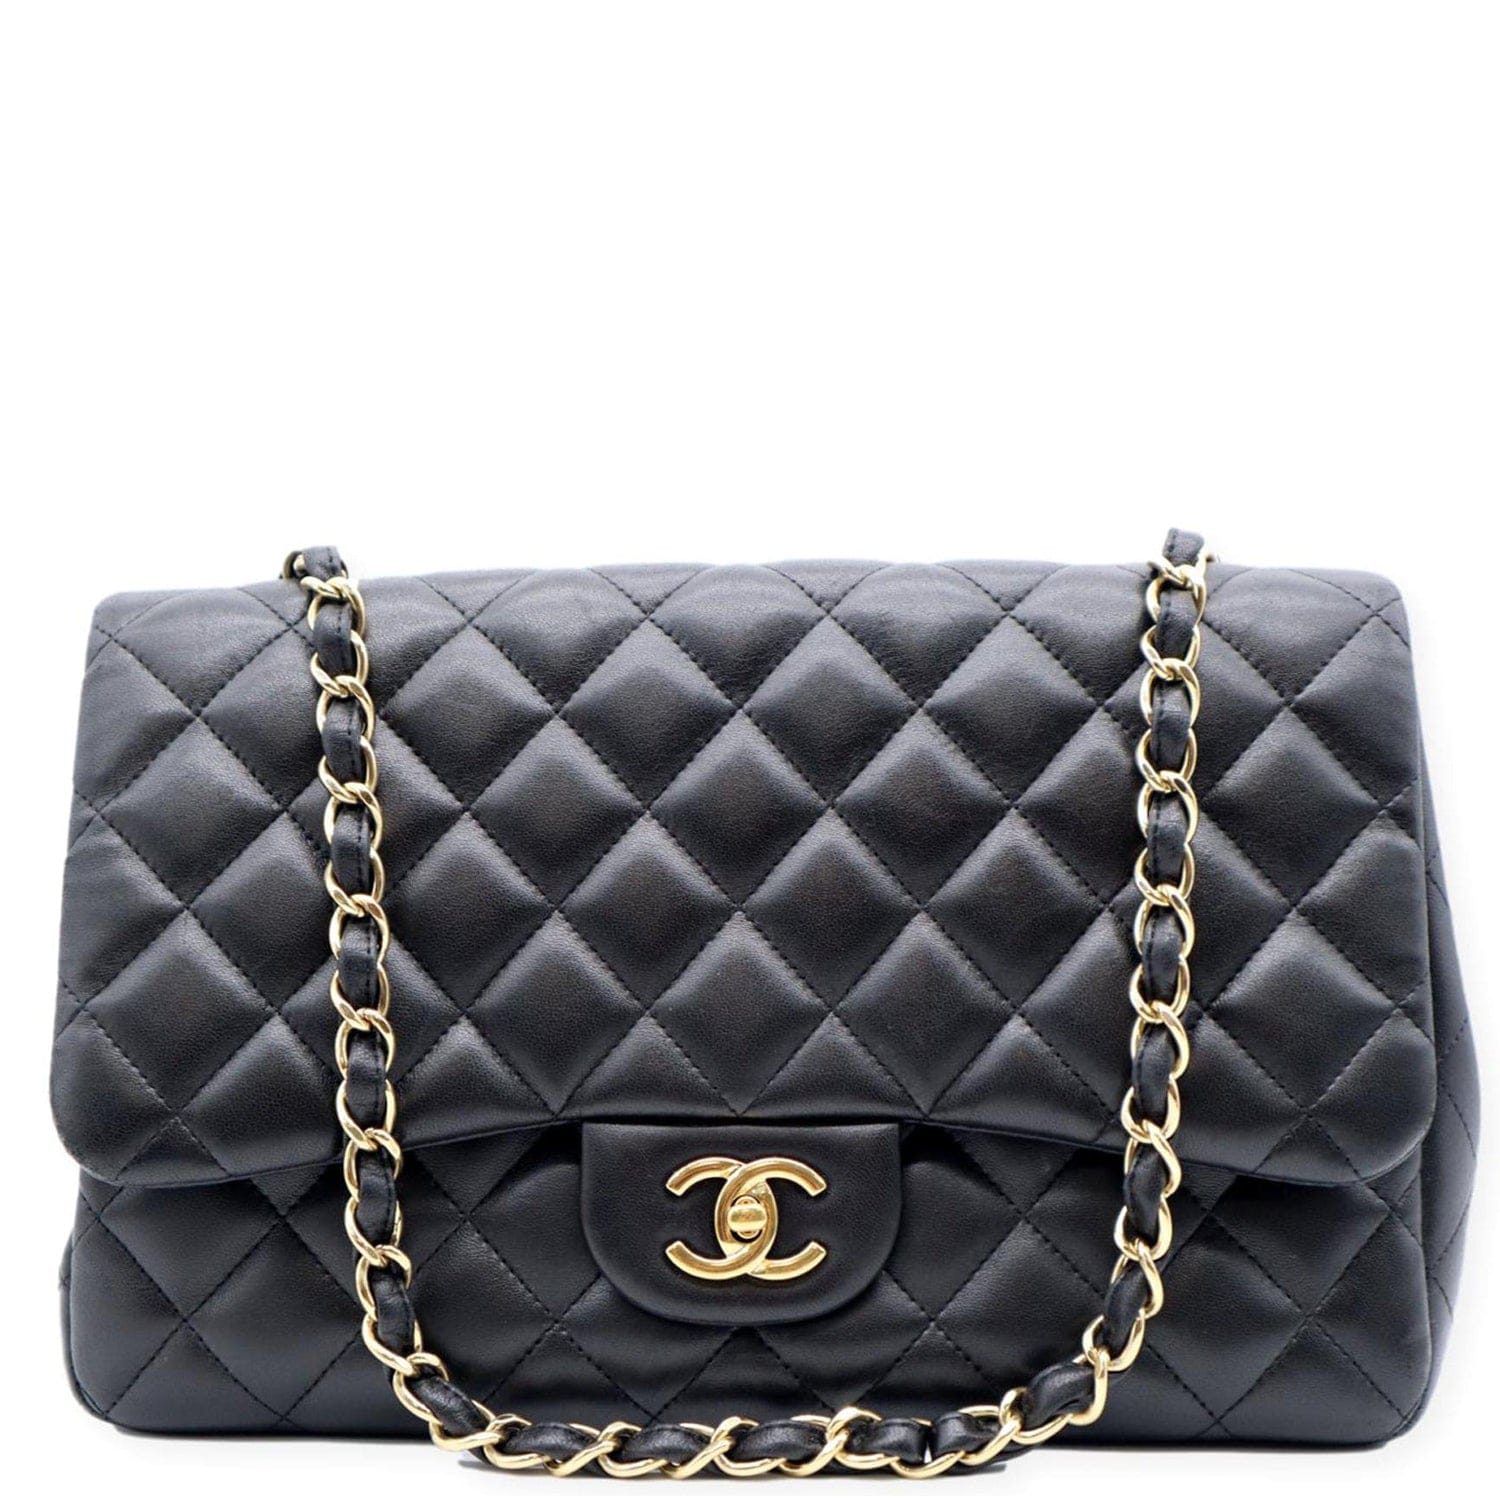 Chanel Classic Flap XL Extra Large Quilted Maxi 5c717 Dark Brown Lambskin  Leather Shoulder Bag, Chanel